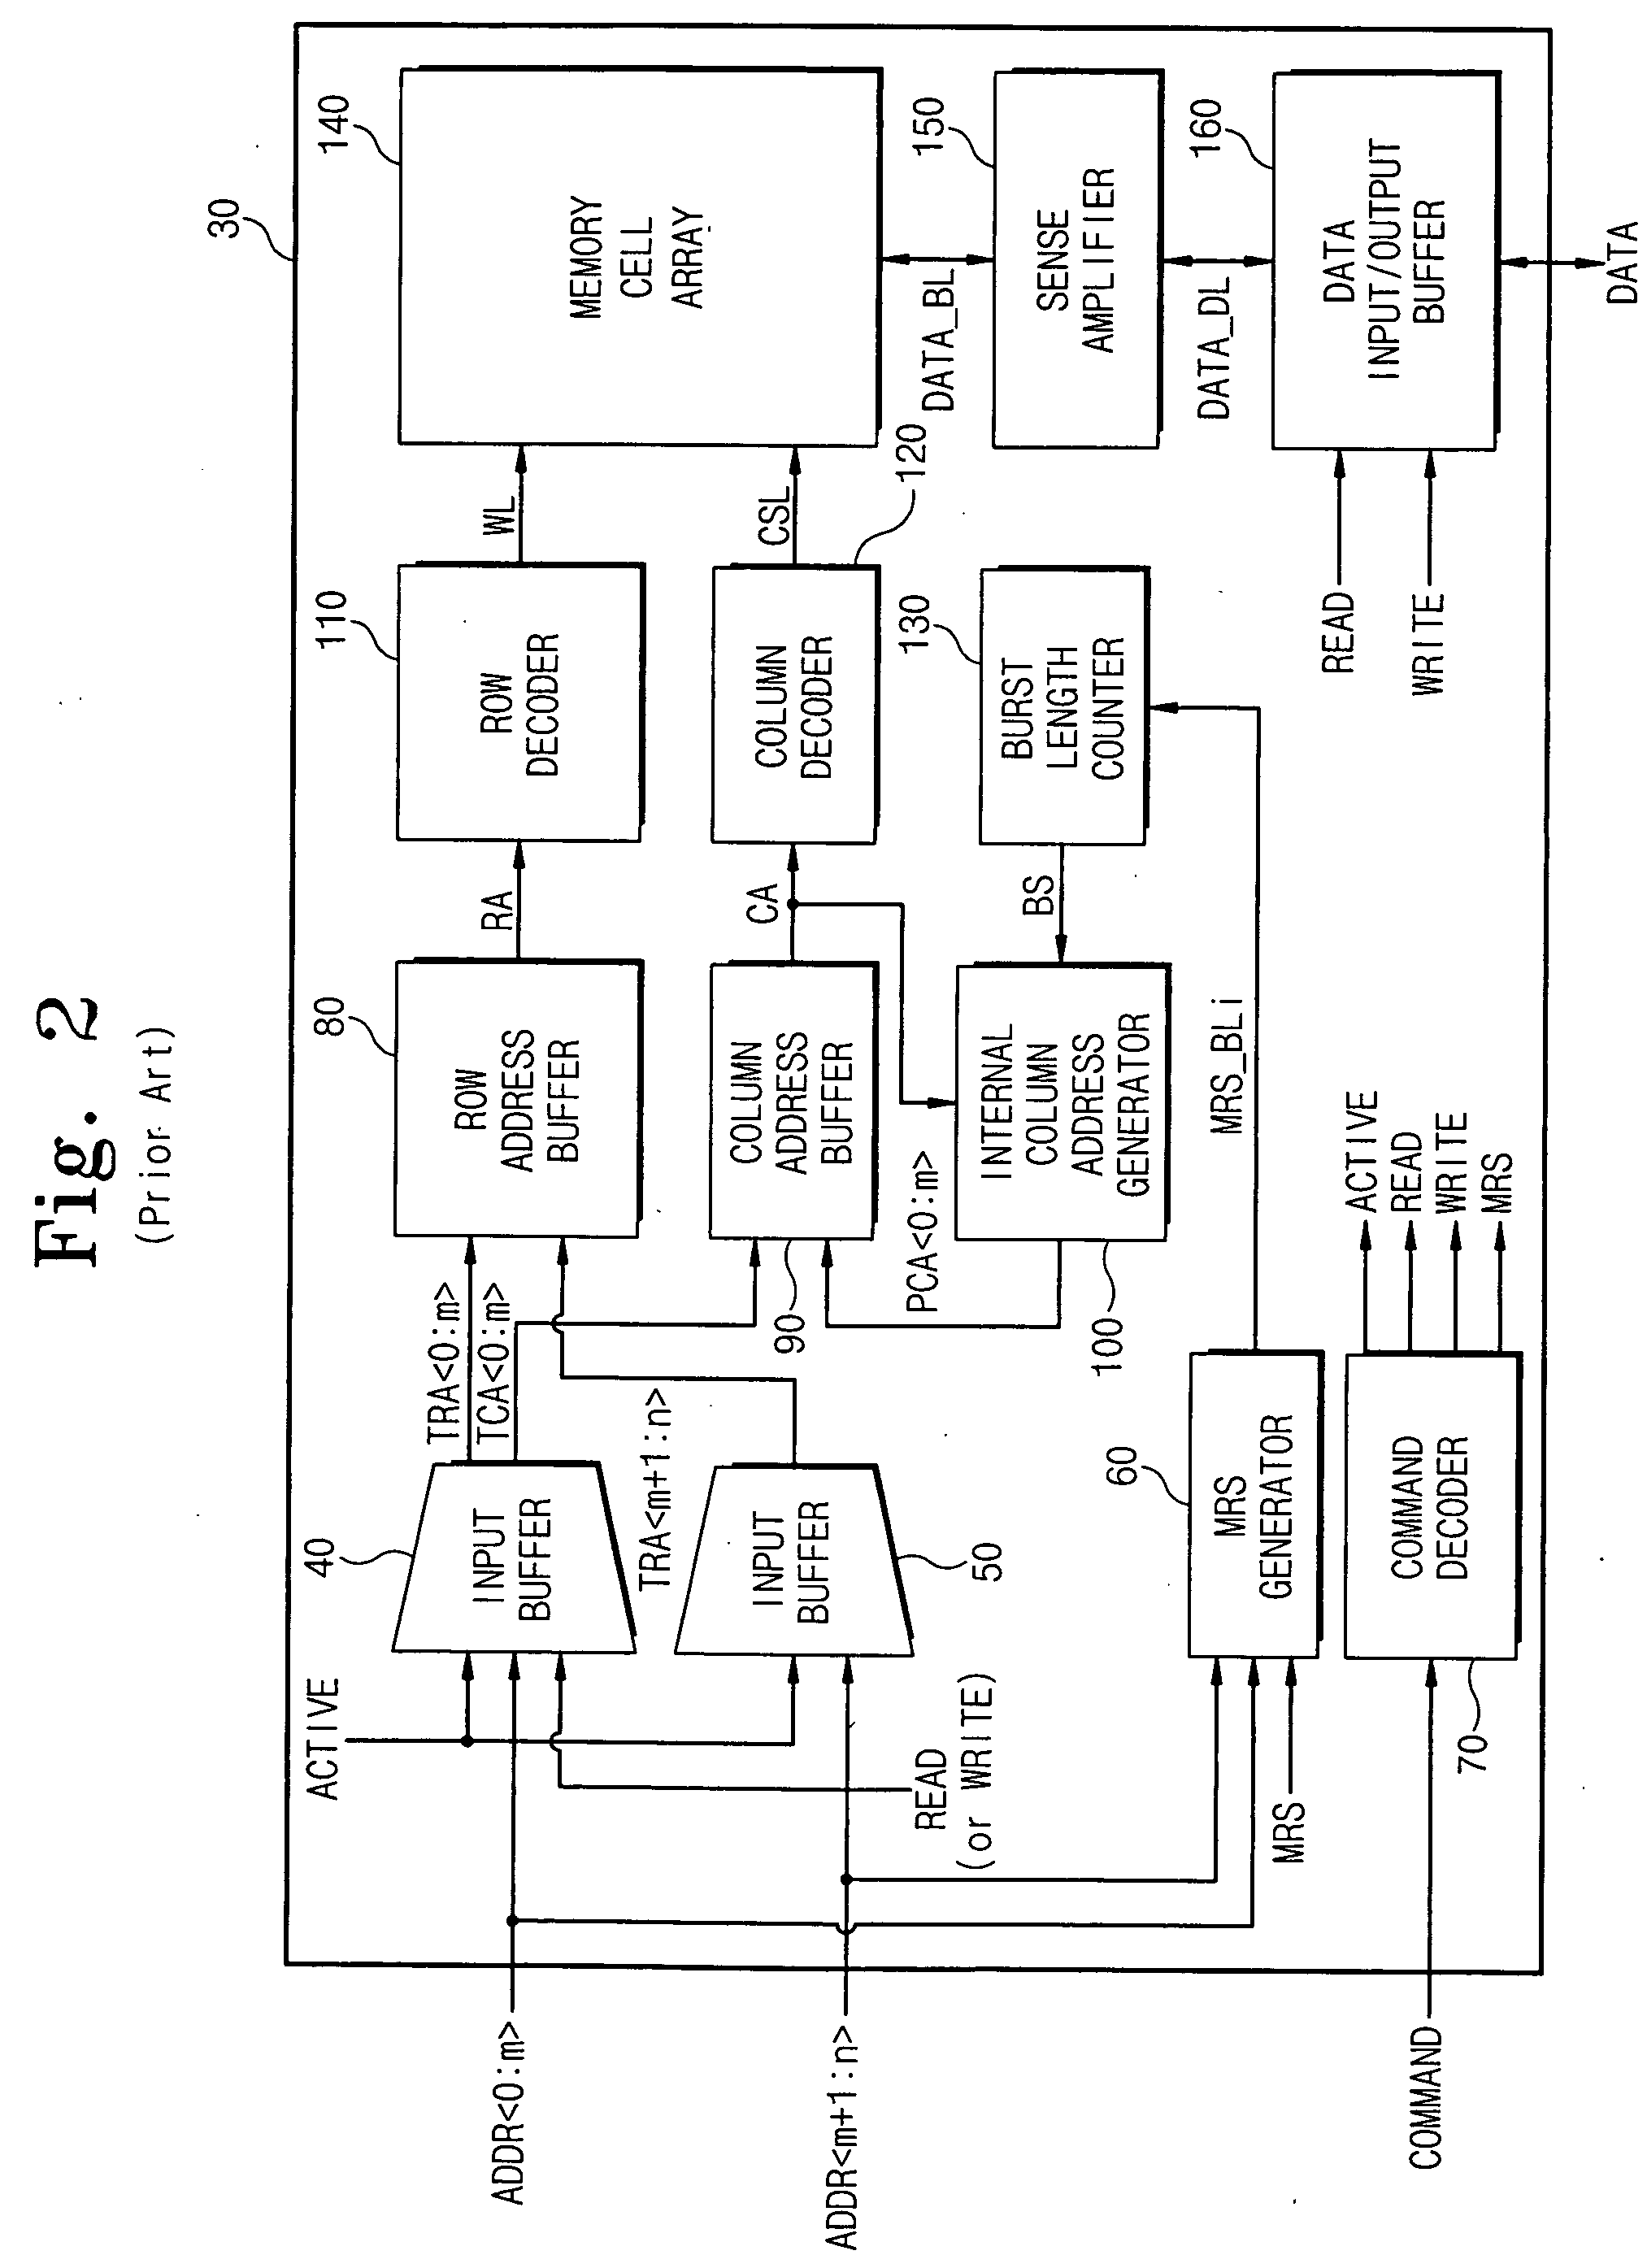 Method and memory system in which operating mode is set using address signal